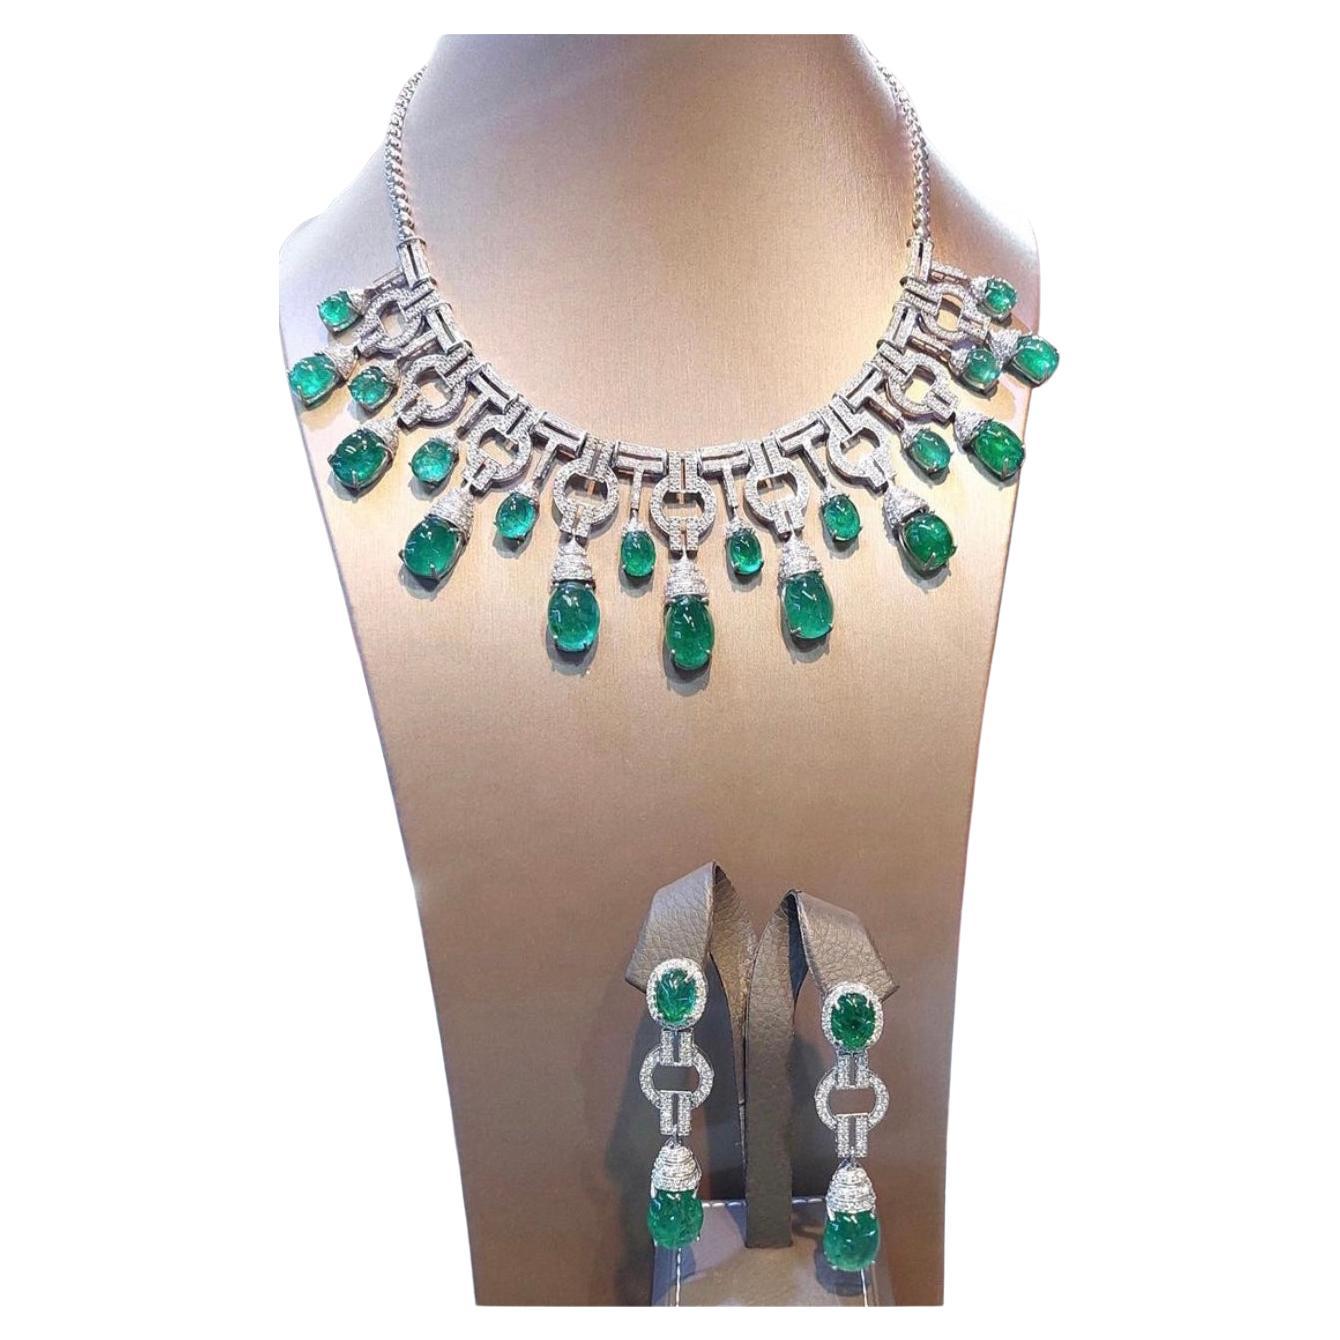 An exceptional Art Deco style parure, complete with earrings and necklace, so stunning and refined , a very piece of art. 
Necklace come in 18k gold with natural emeralds from Zambia, extra fine quality, in cabochon cut , Ceo Minor, of 91,85 carats,